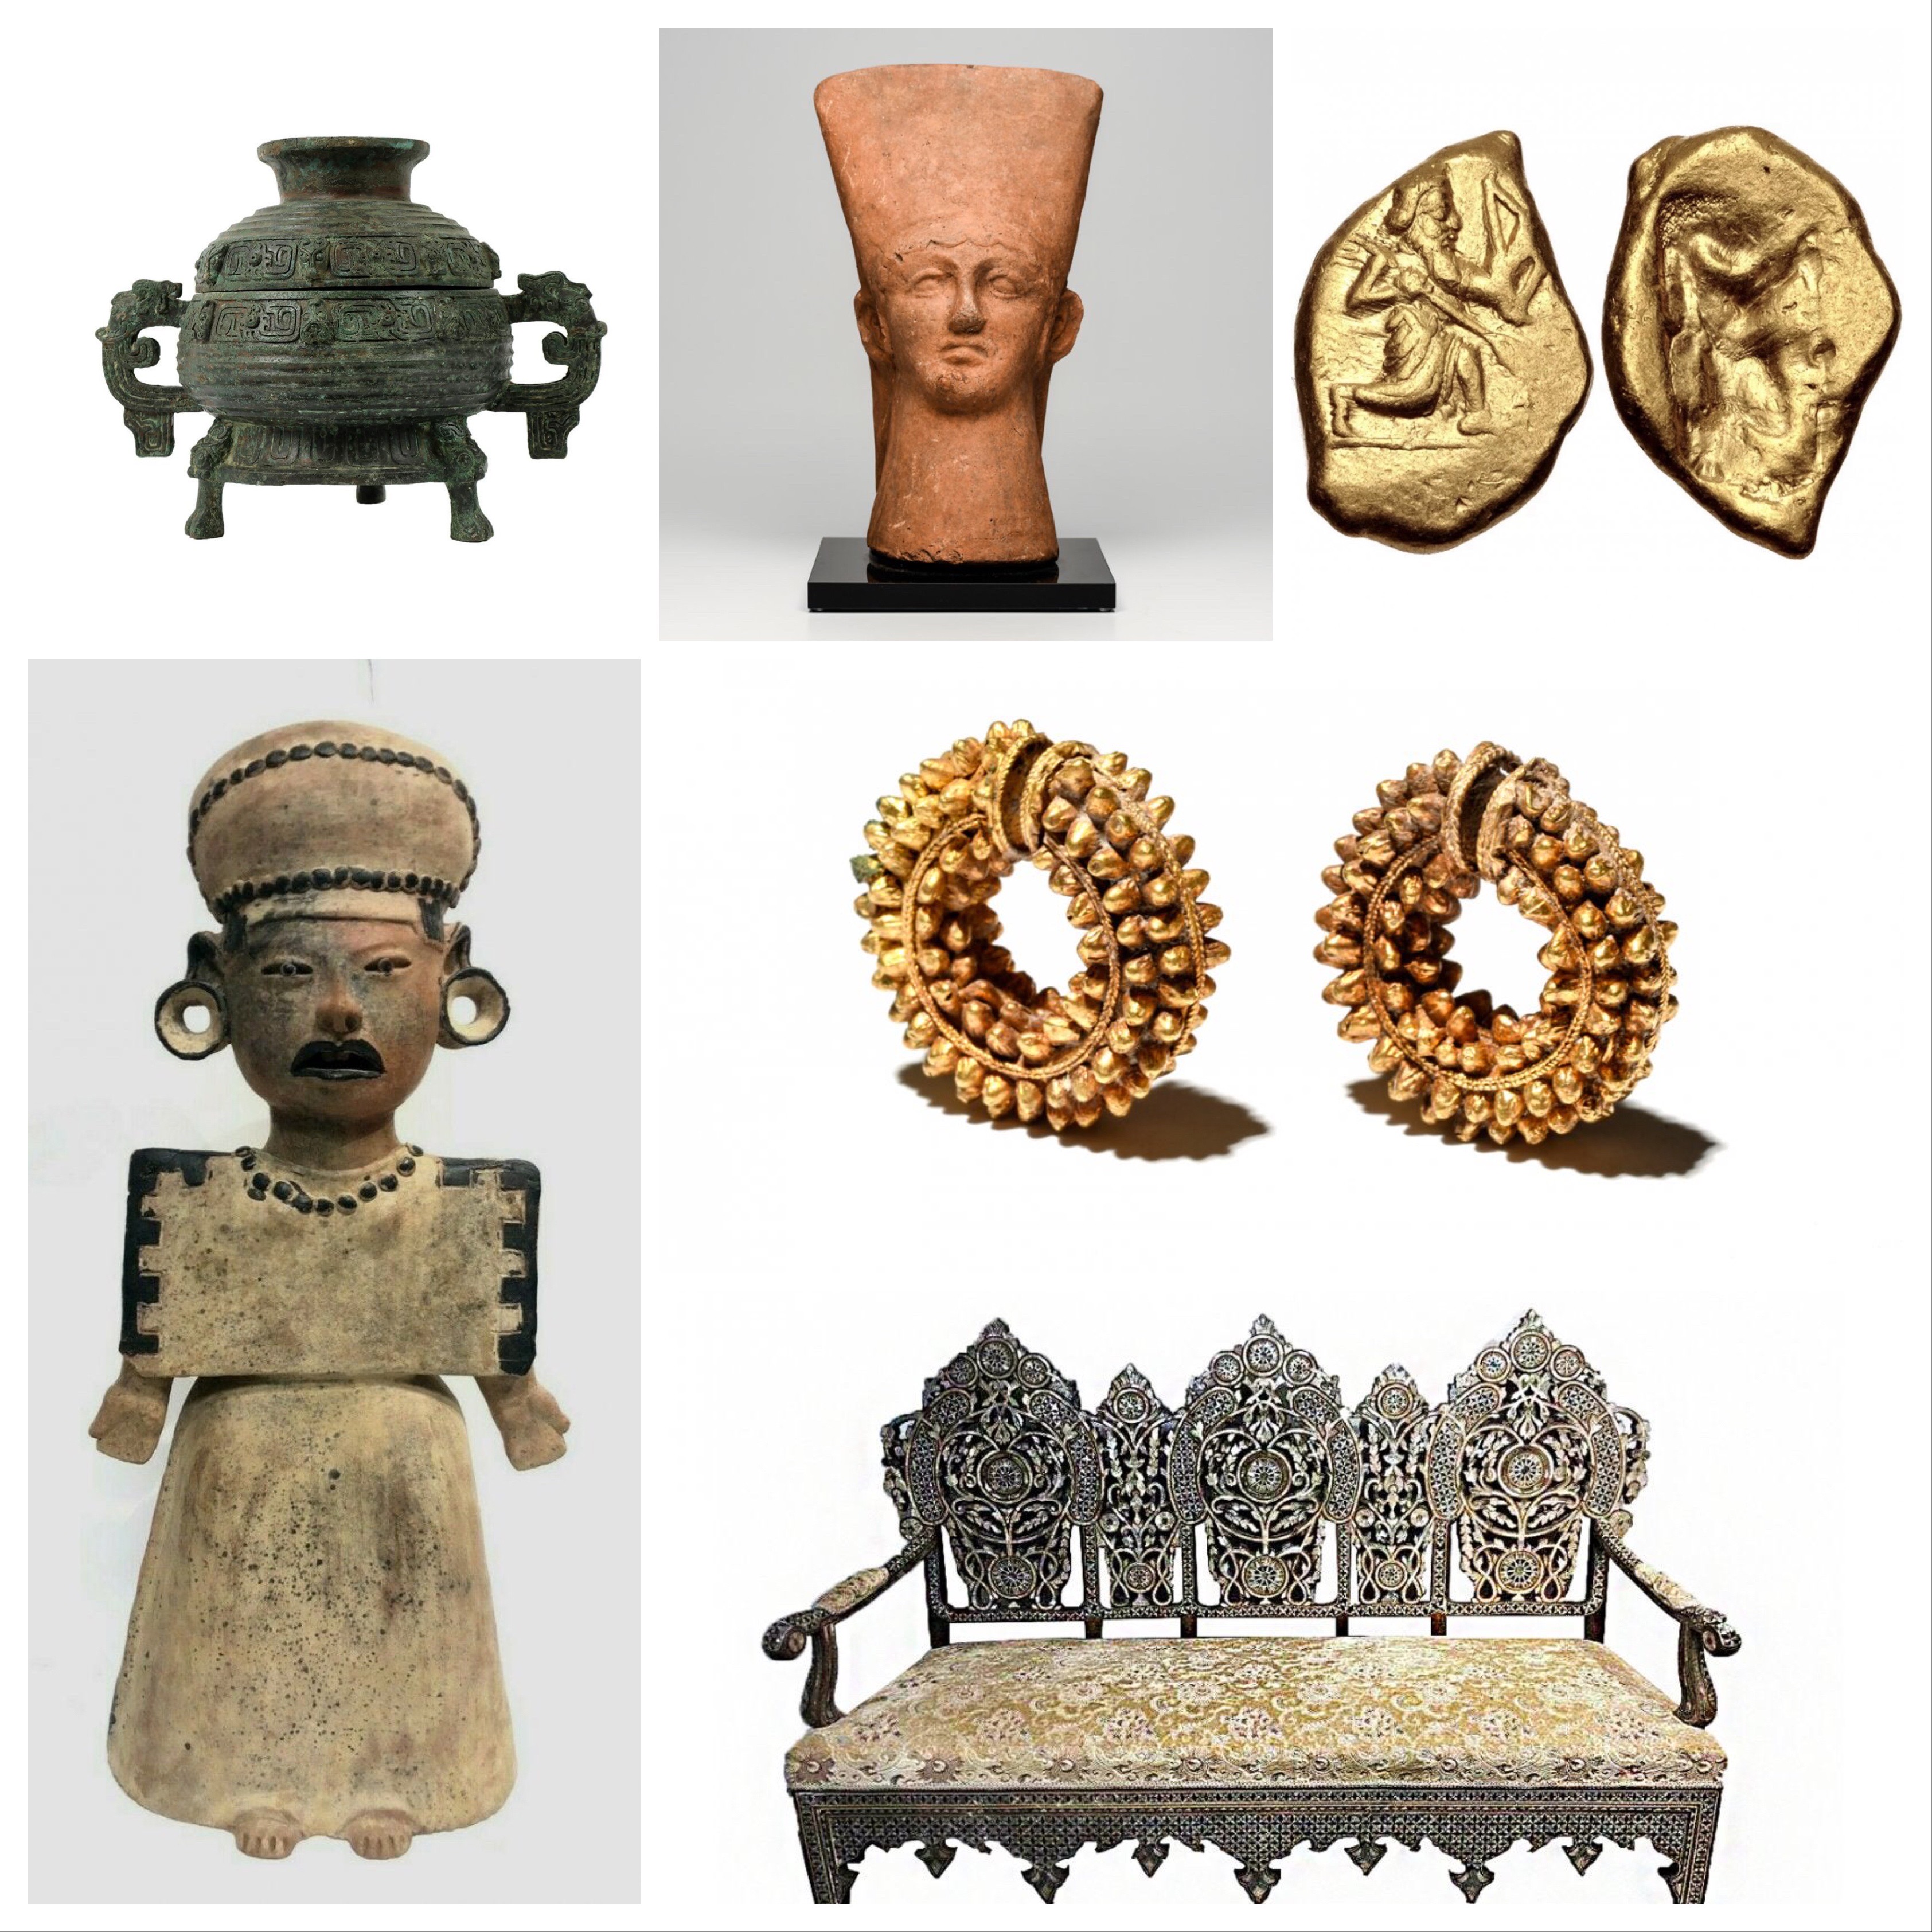 Antiquities and Antiques available at auction ( Antique Chinese Incense Burner, Ancient Etruscan Large Pottery Youthful Male Head Ca., Ancient Achaemenid Empire. temp. Xerxes II gold Daric, Ancient Parthian Gold Earrings, Ottoman Syrian Mother Of Pearls Wood Couch and Pre Columbian Veracruz Monumental Priestess Figure)